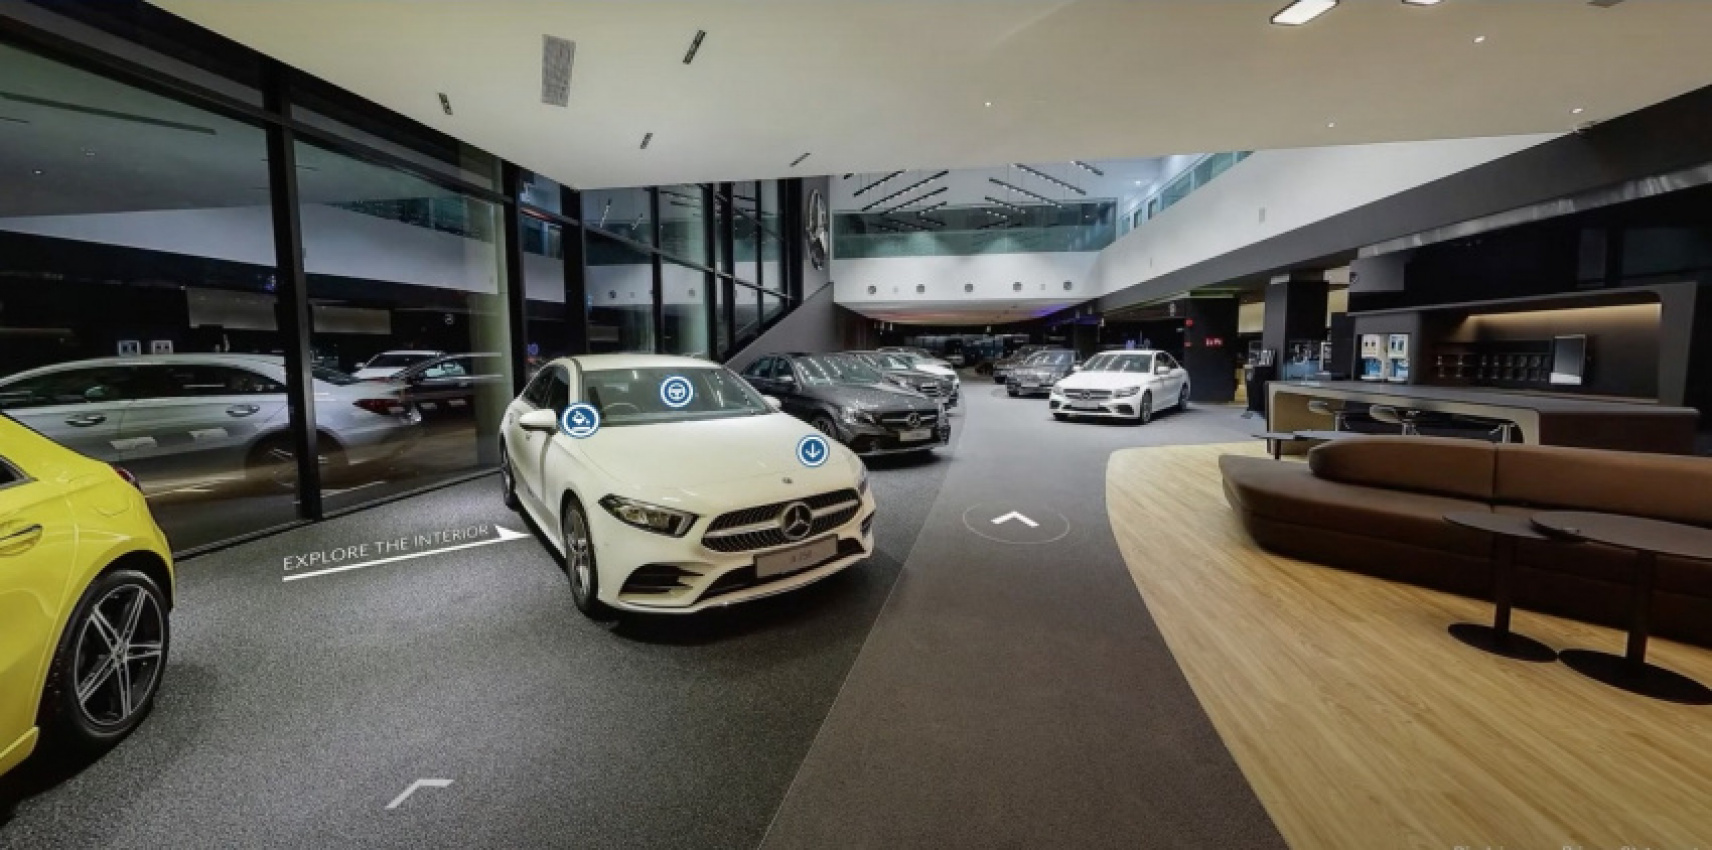 autos, car brands, cars, mercedes-benz, automotive, cars, cycle & carriage, cycle & carriage bintang, dealership, mercedes, mercedes-benz malaysia, virtual showroom, cycle & carriage launches mercedes-benz virtual showroom